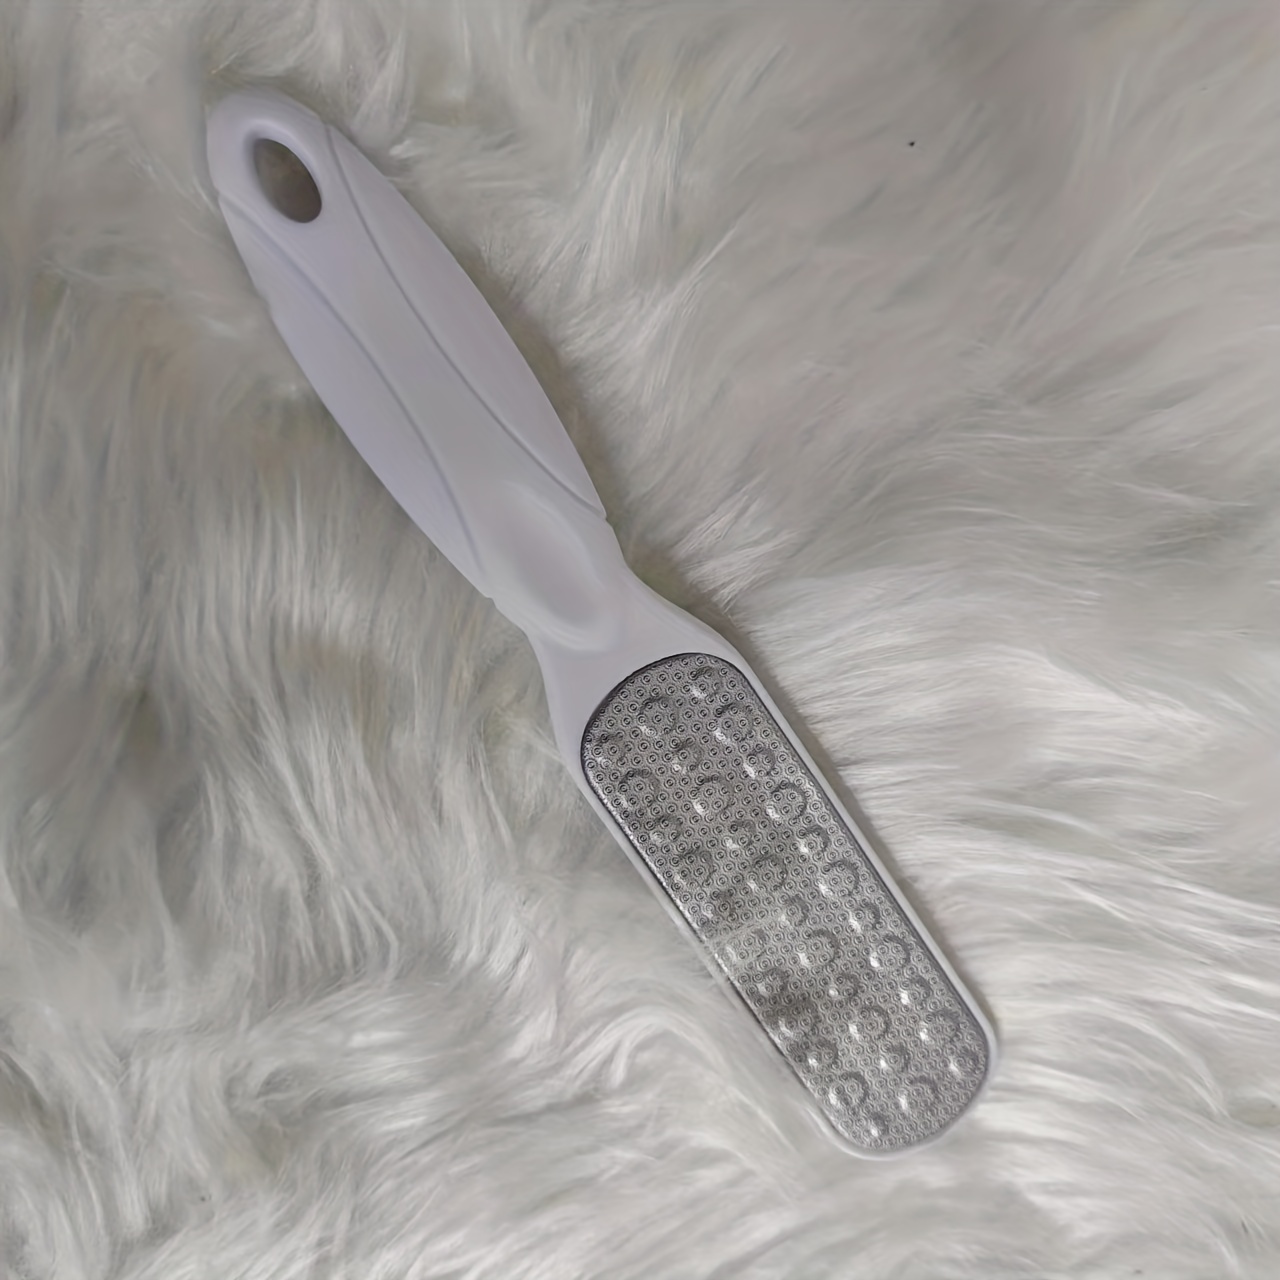 High-quality Double-headed Stainless Steel Foot Scrubbing Board - Remove  Dead Skin, Calluses, And Horny Toenails